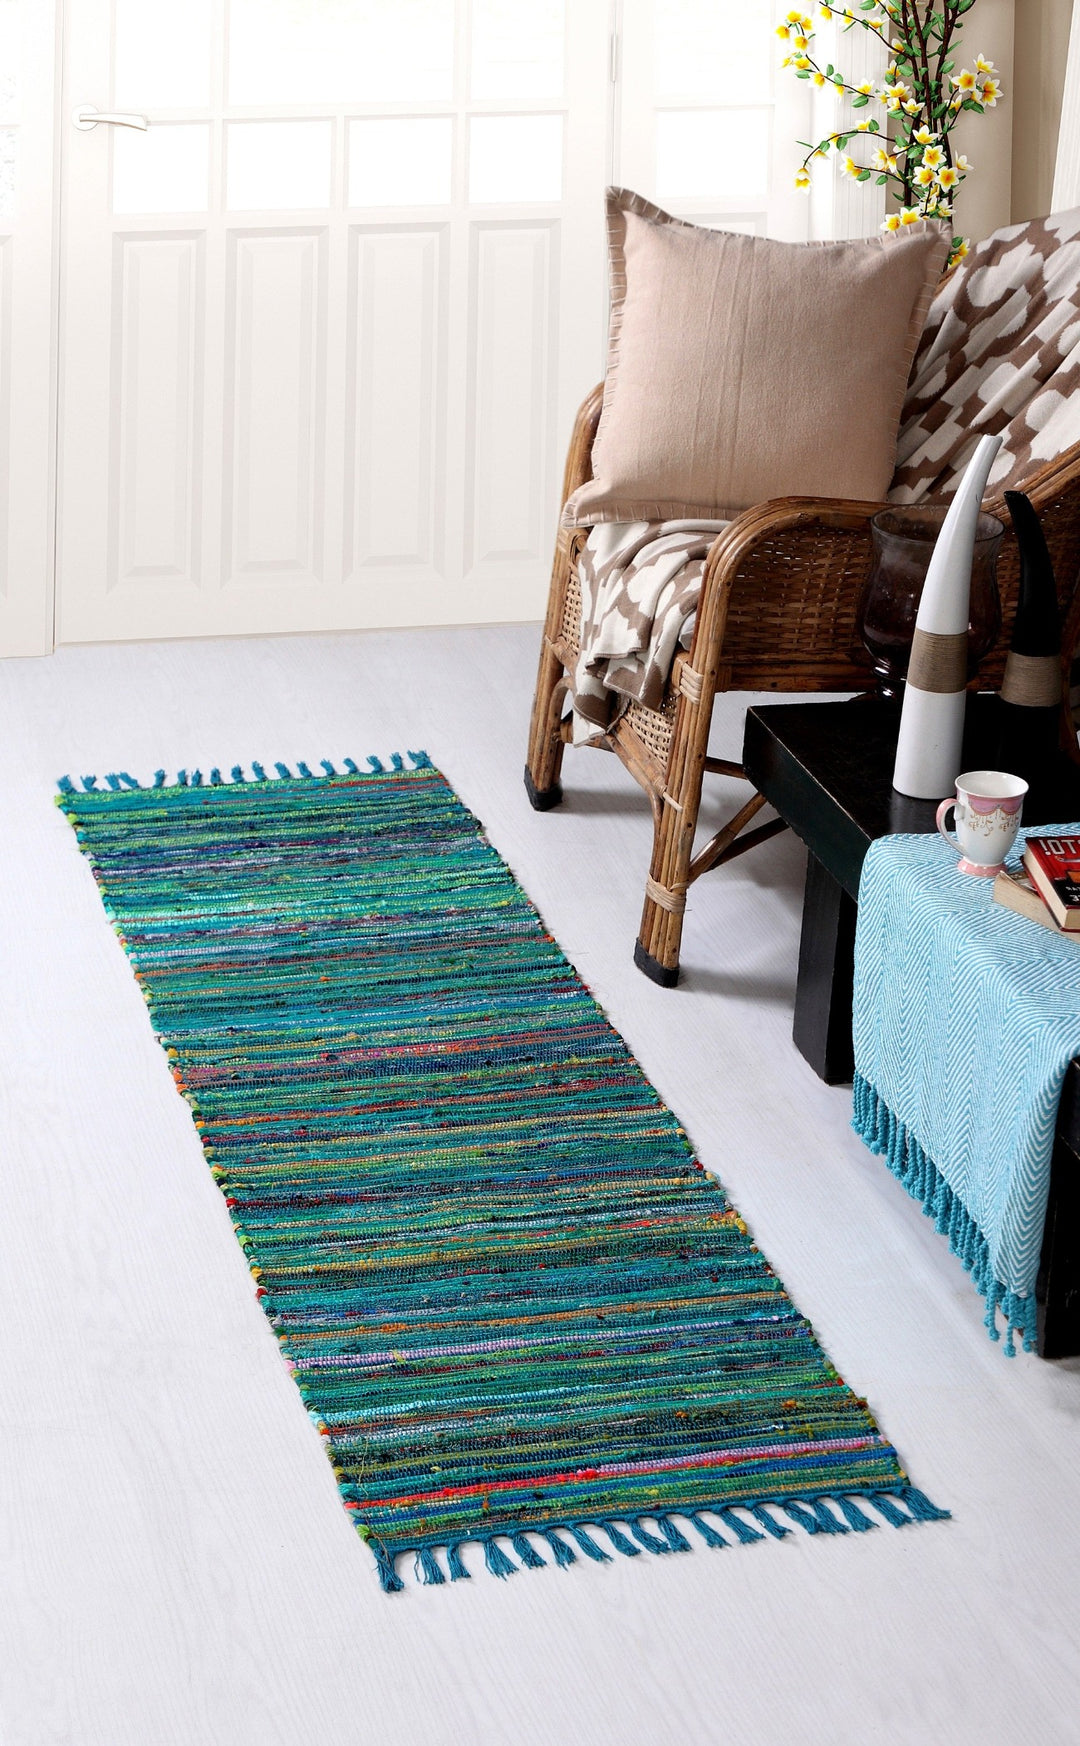 Festival Recycled Cotton Blend Rag Rug in Varied Colourways Indoor and Outdoor Use